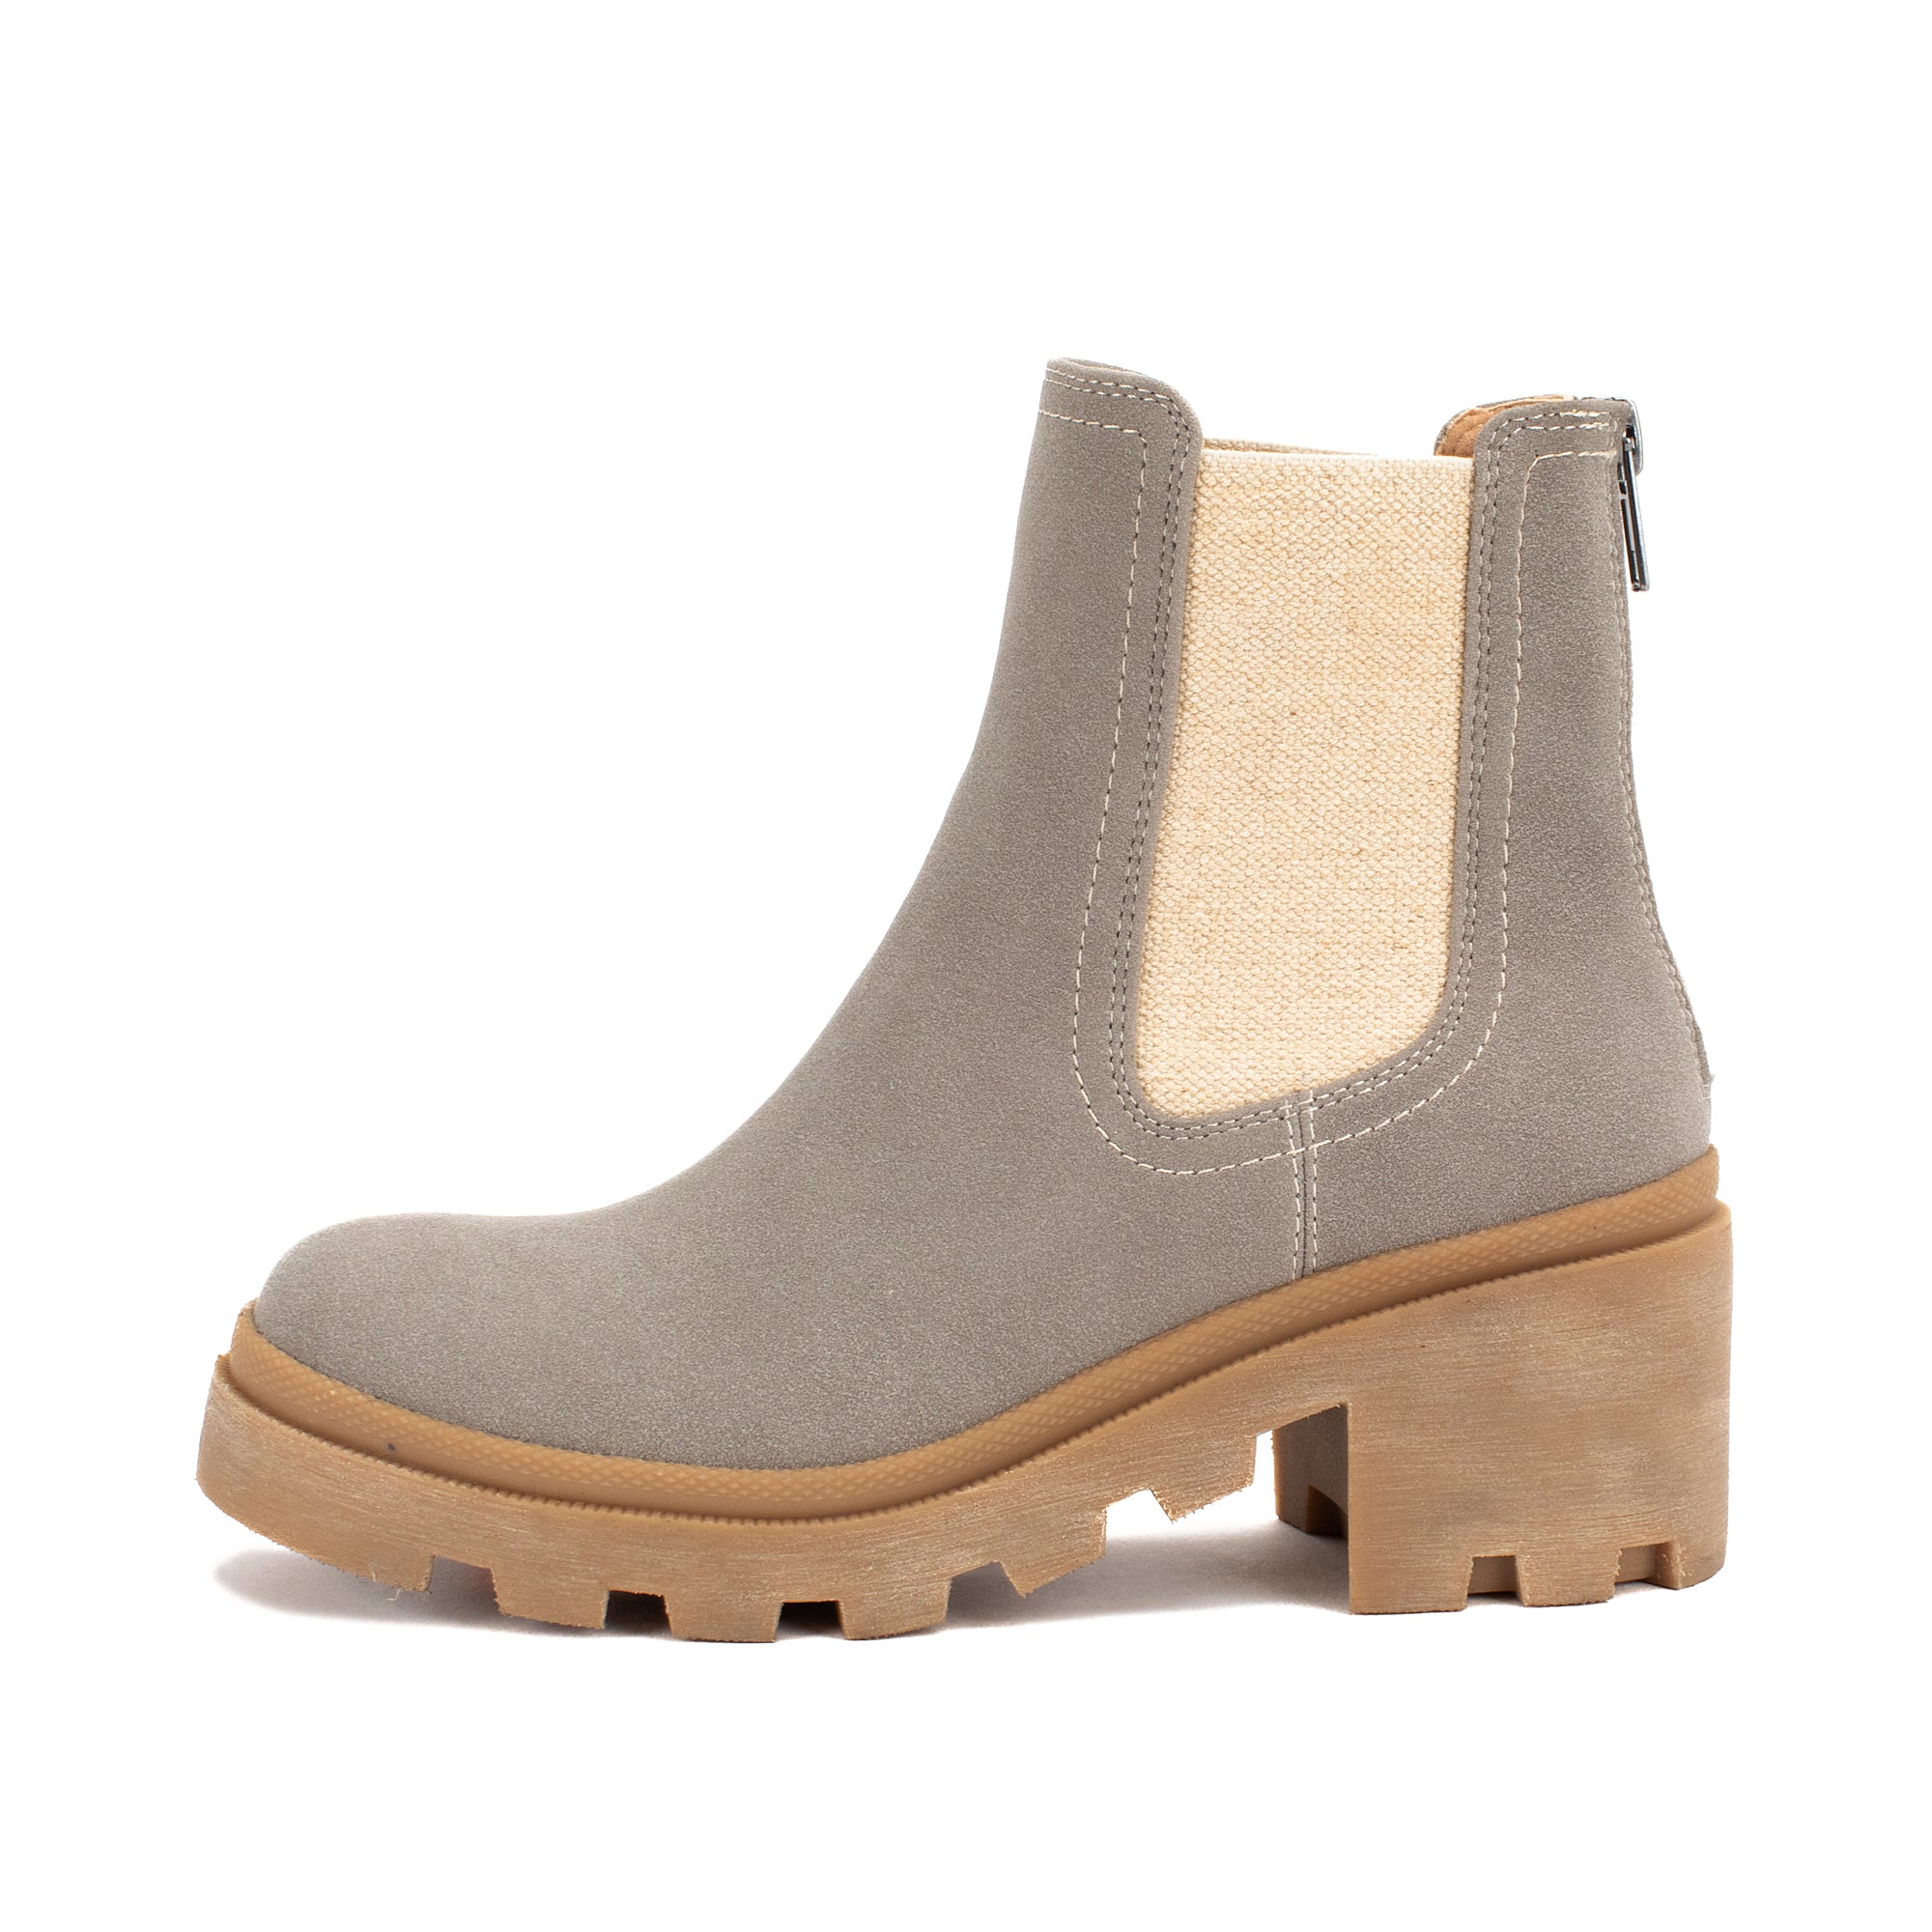 Women's Boots & Booties | Yellow Box Official Site